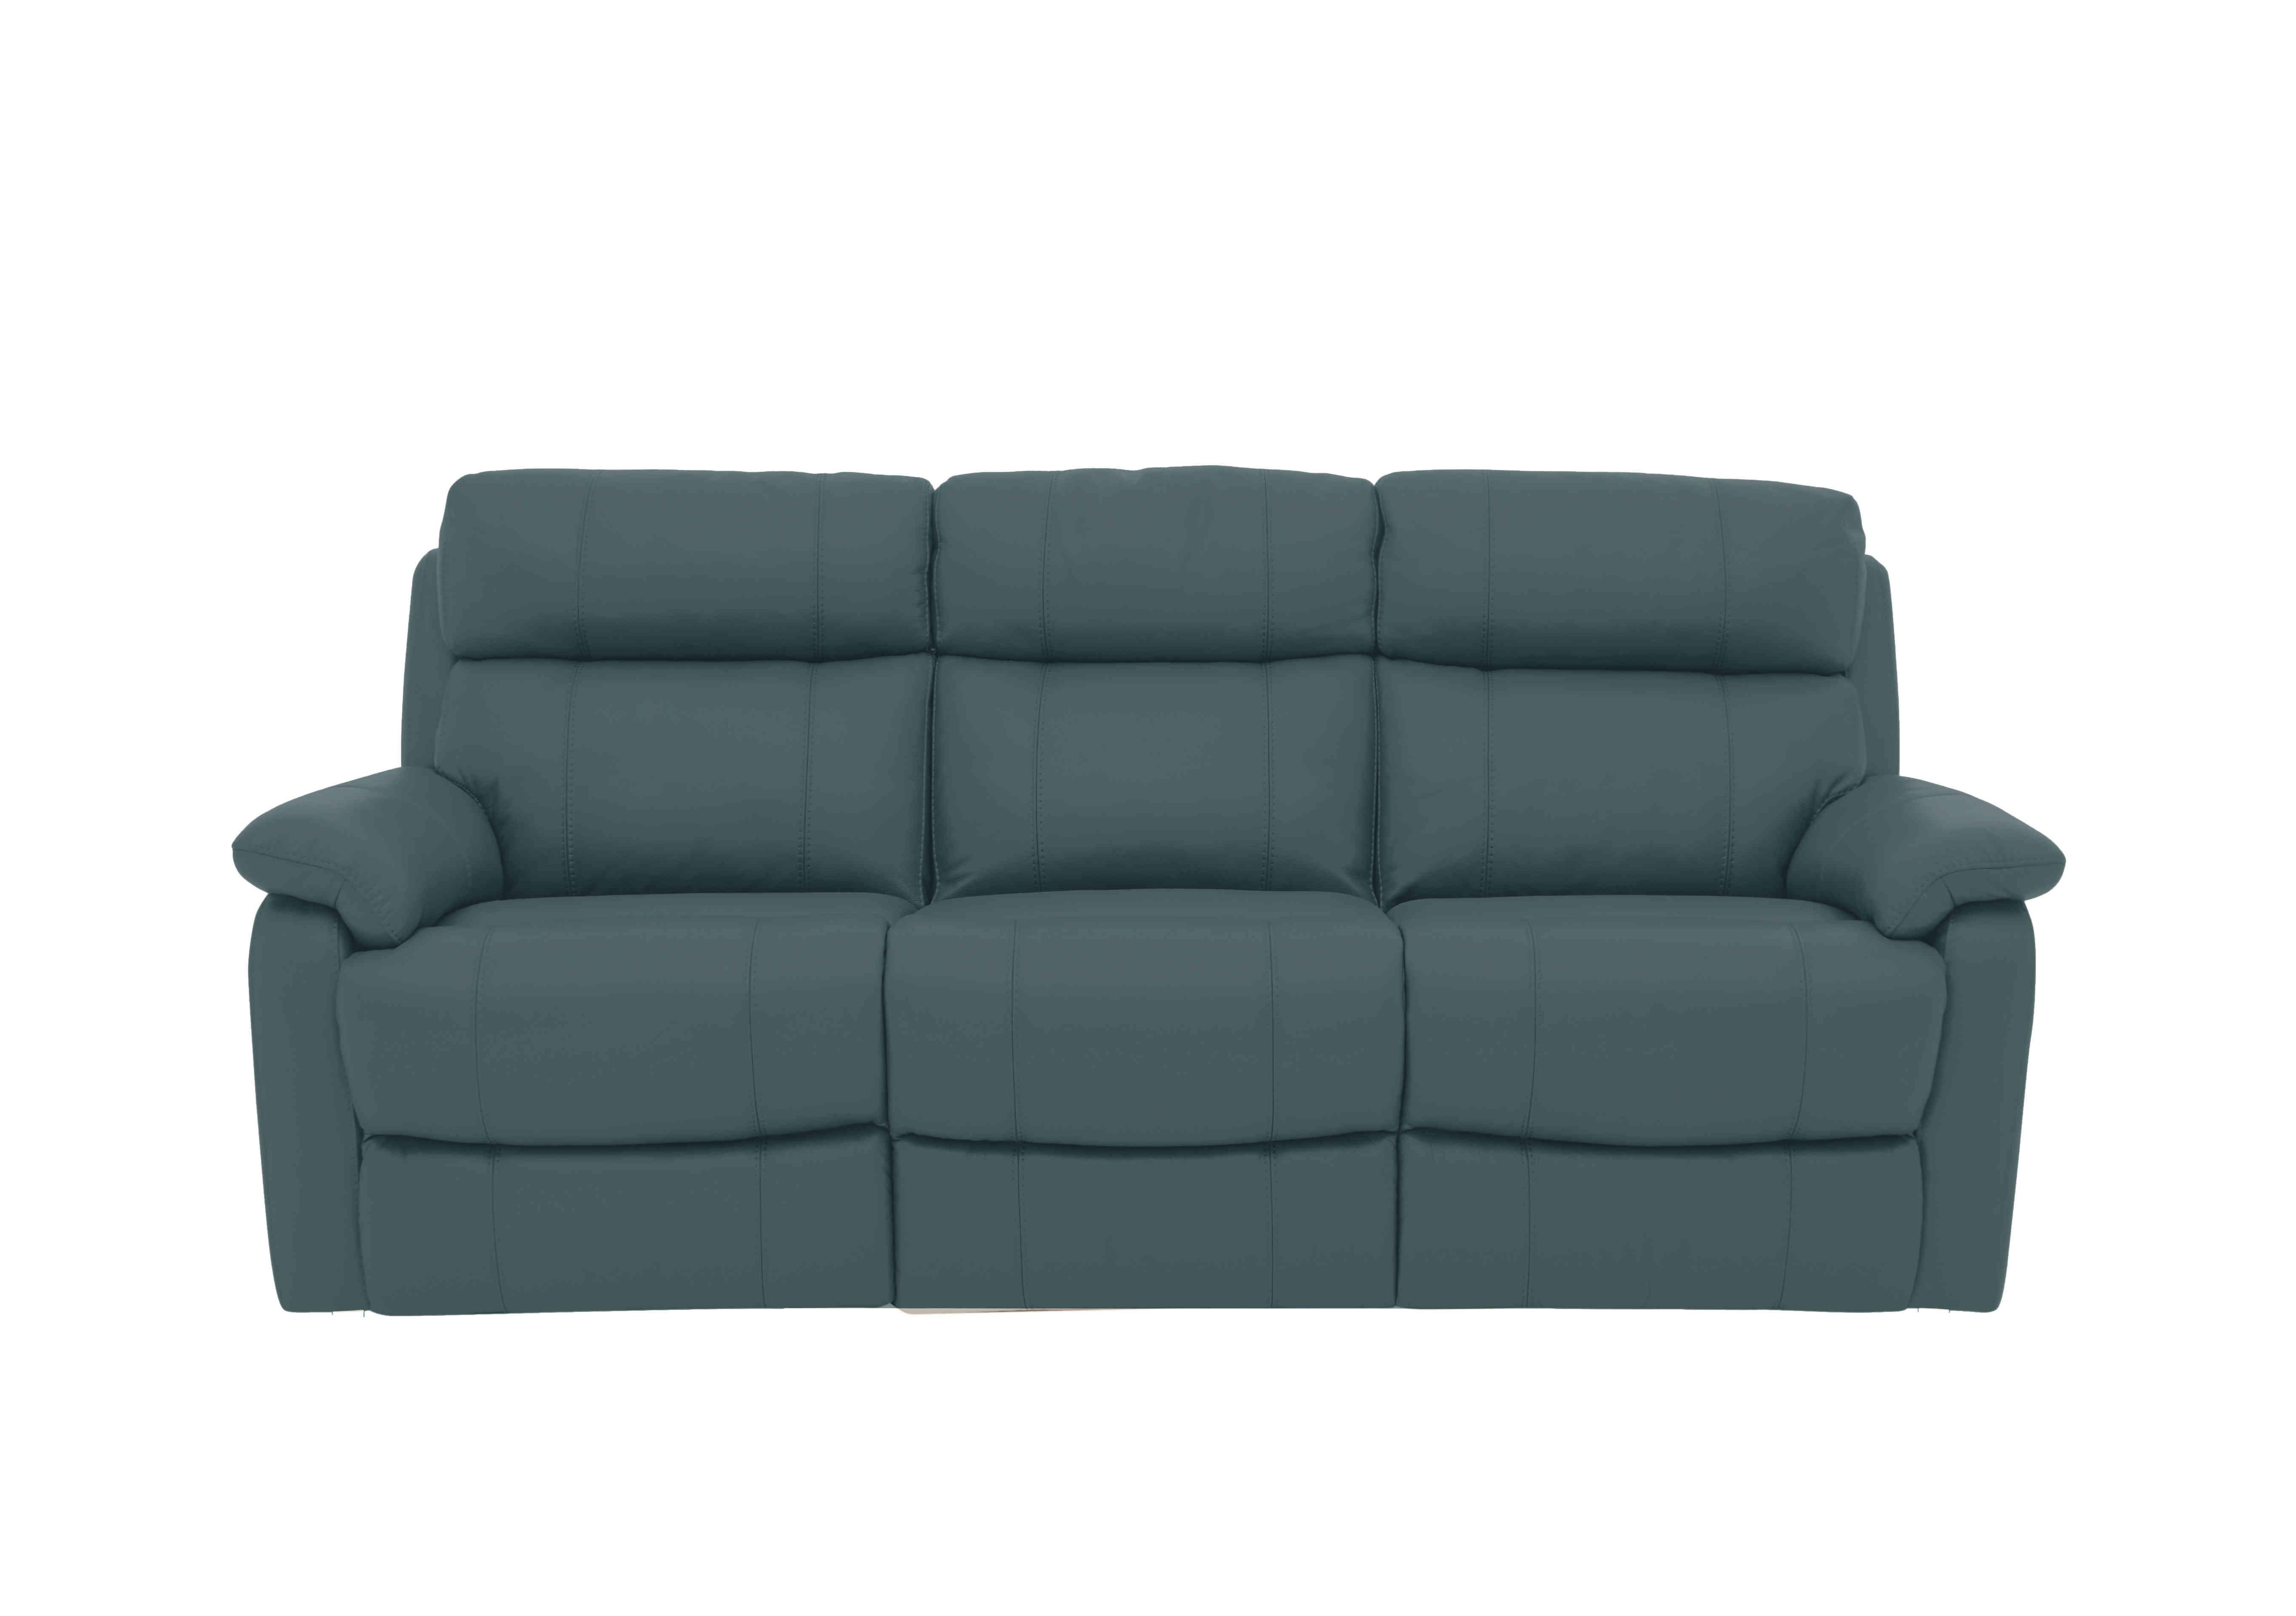 Relax Station Komodo 3 Seater Leather Sofa with Power Headrests and Cup Holders in Bv-301e Lake Green on Furniture Village